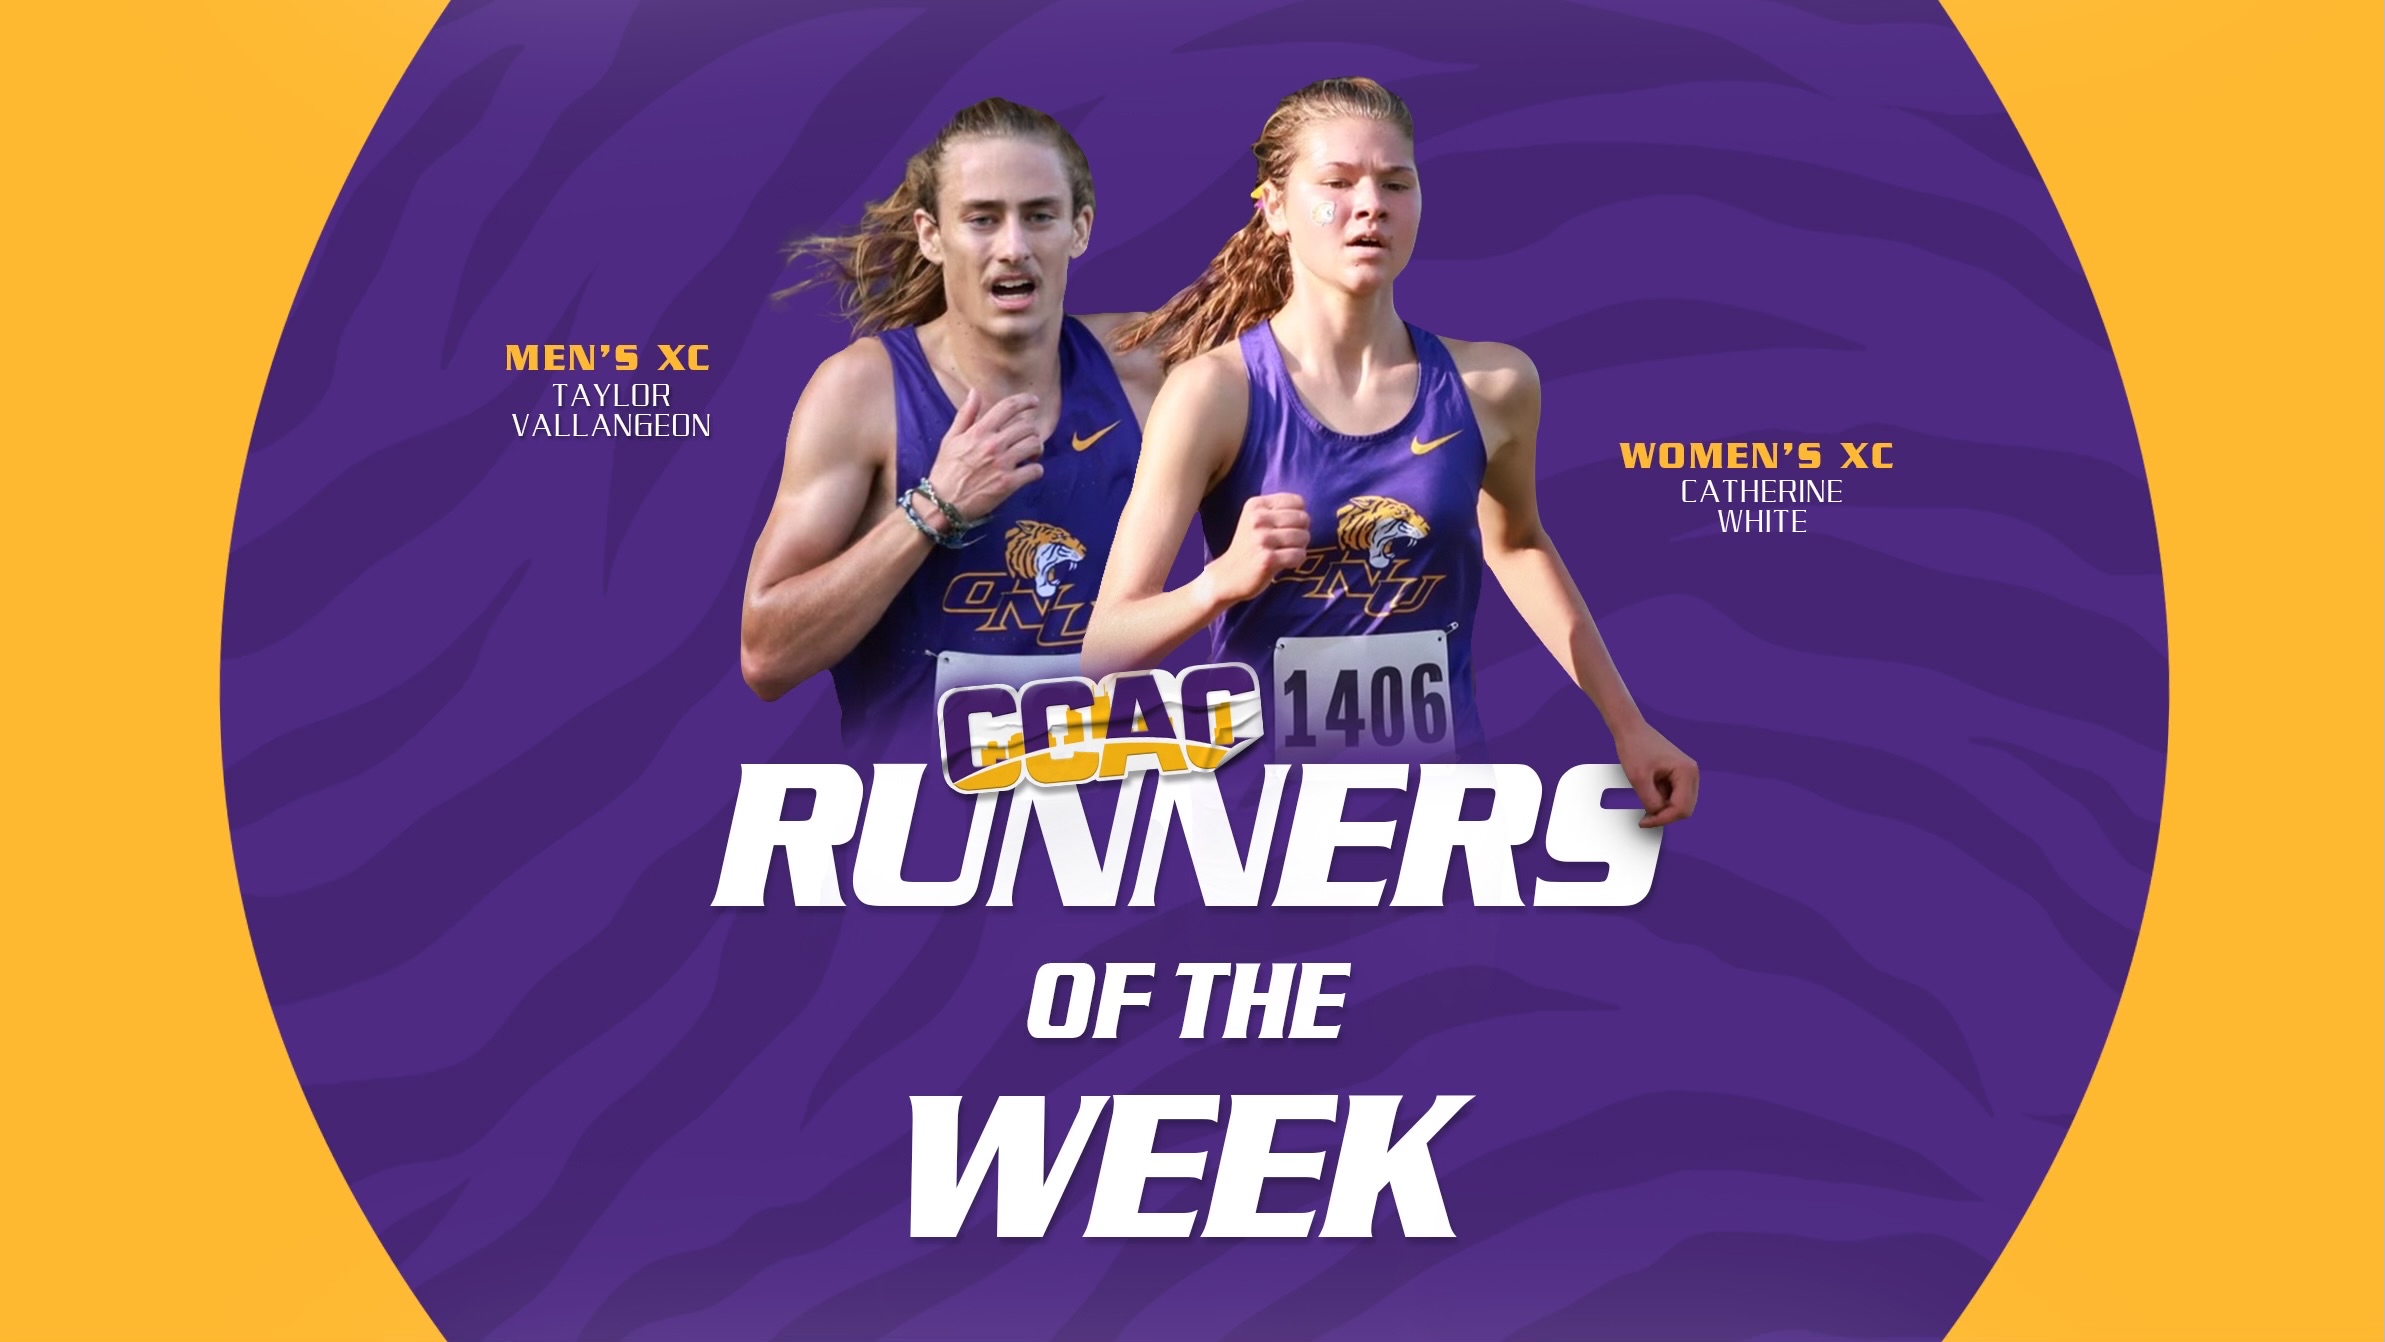 VALLANGEON, WHITE TAKE HOME WEEKLY CCAC CROSS COUNTRY HONORS